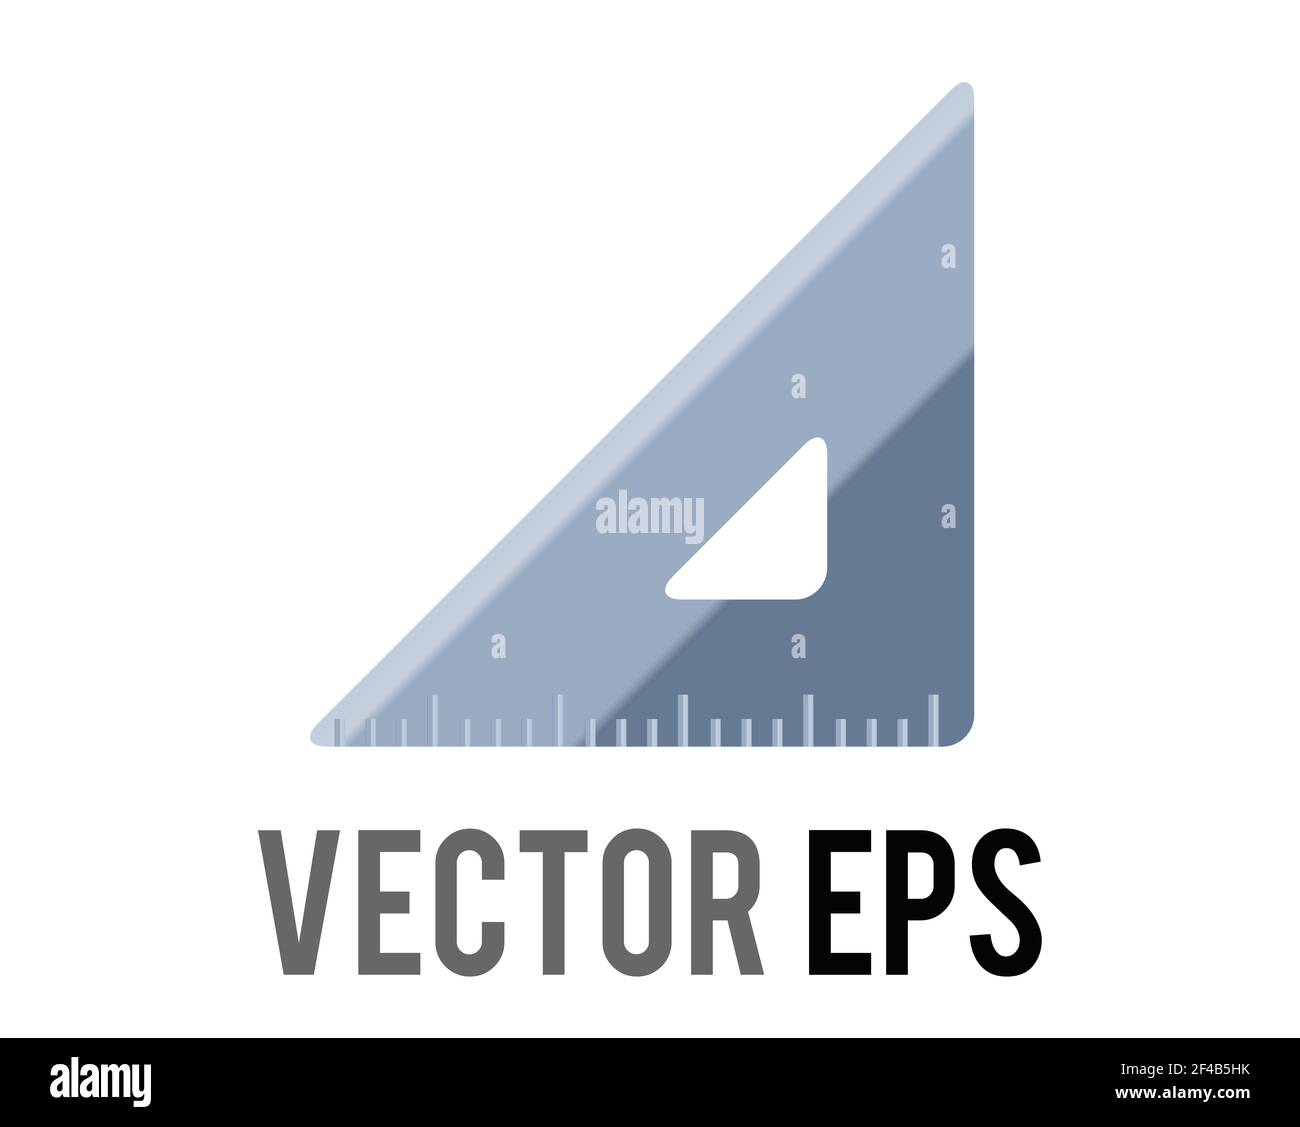 The isolated vector silver metal triangular ruler icon, as used to draw lines and measure distance, used for content concerning schooling, building an Stock Photo